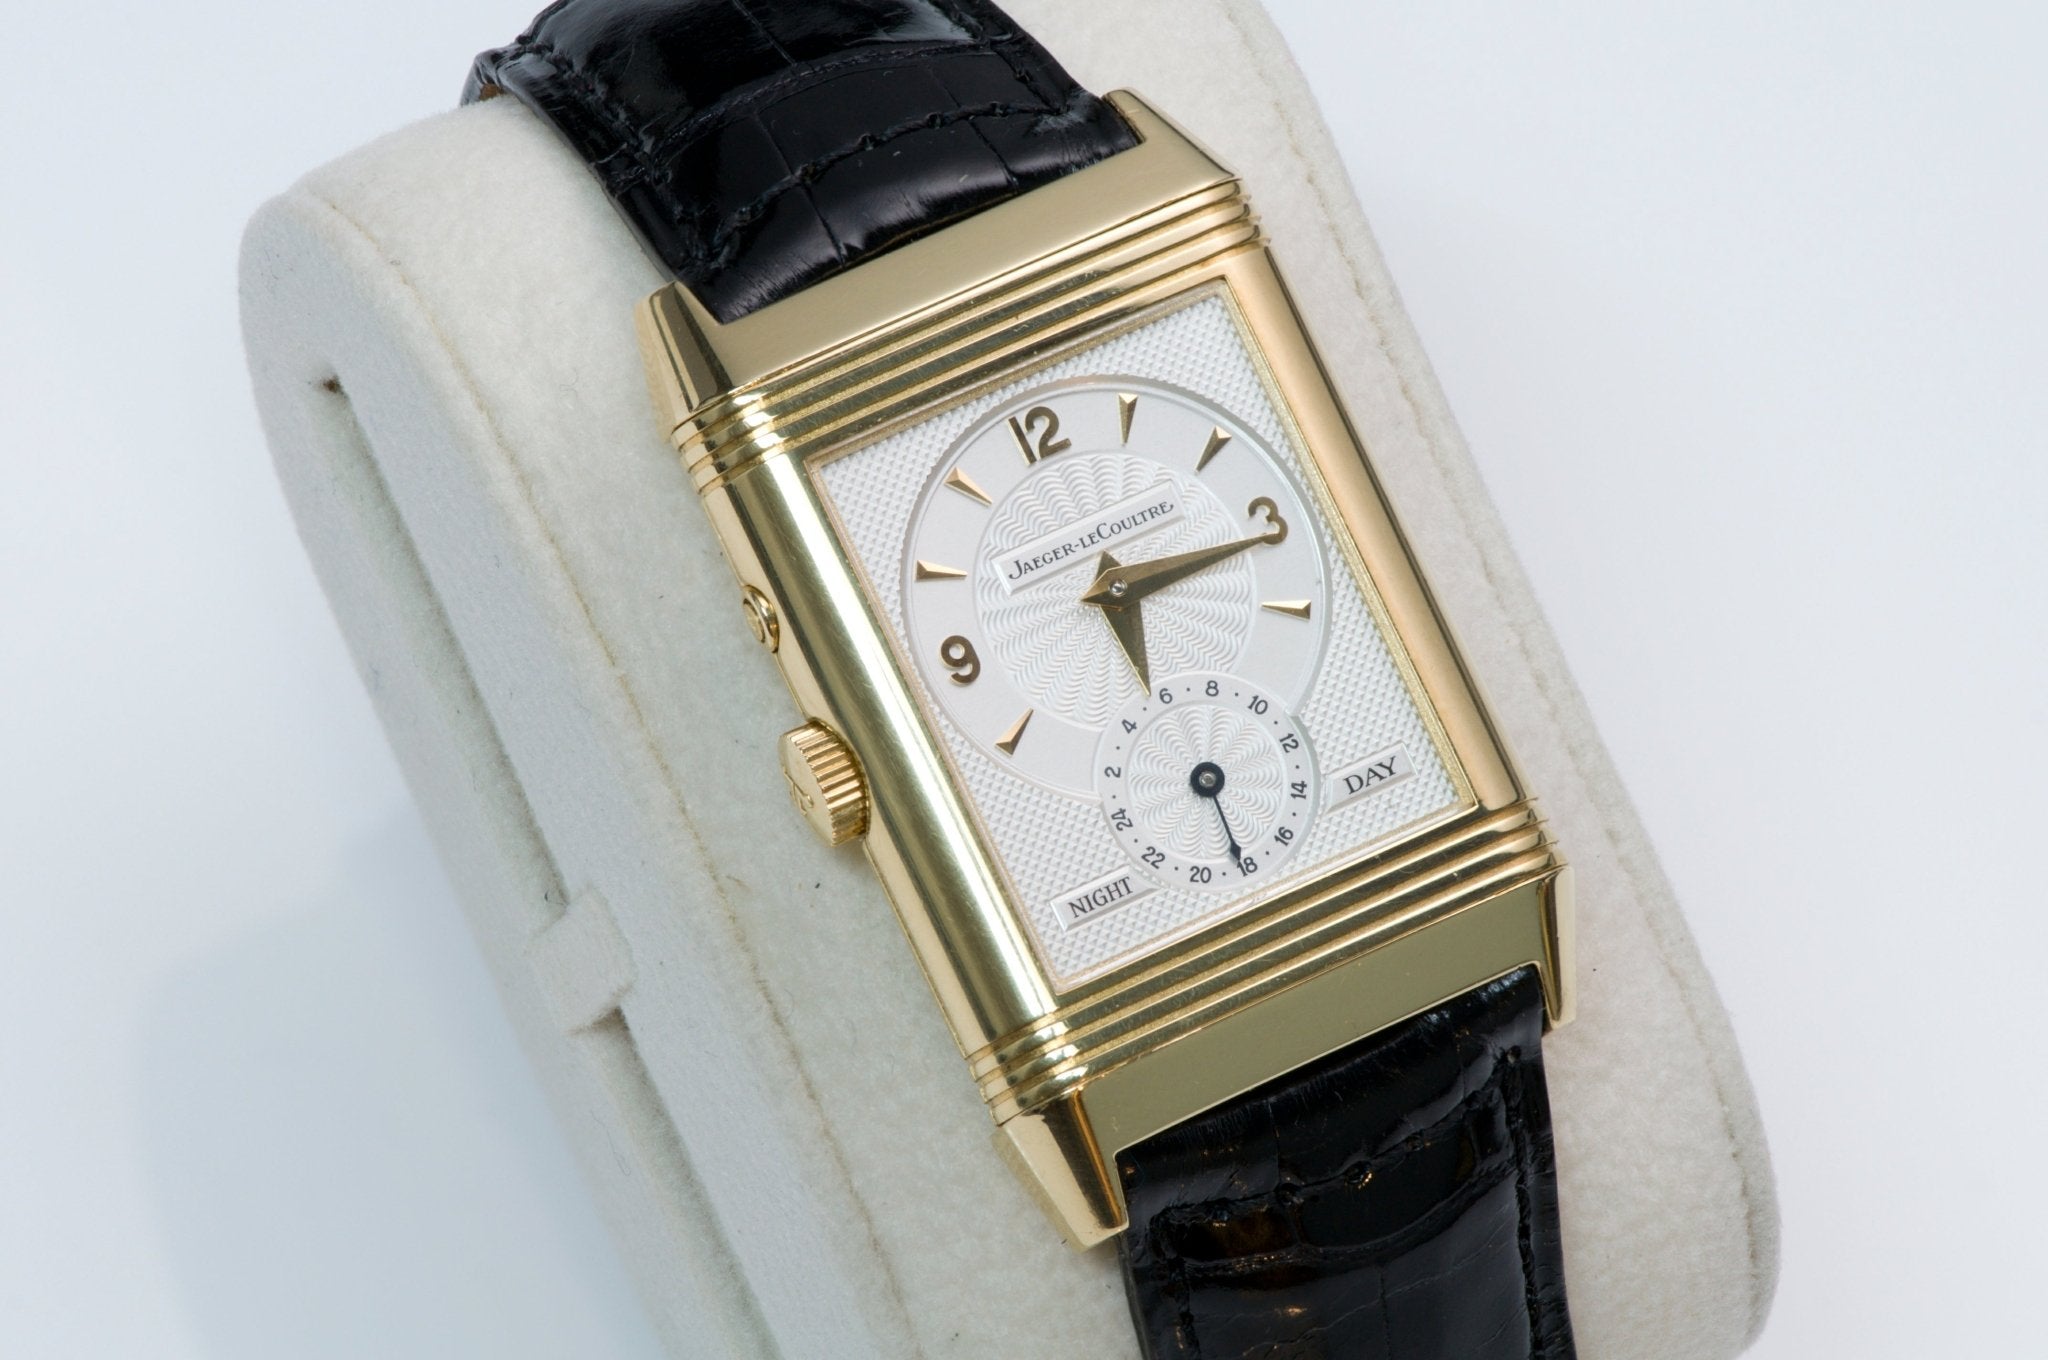 Jaeger-LeCoultre Reverso Duo Day Night Gold Watch 270.1.54